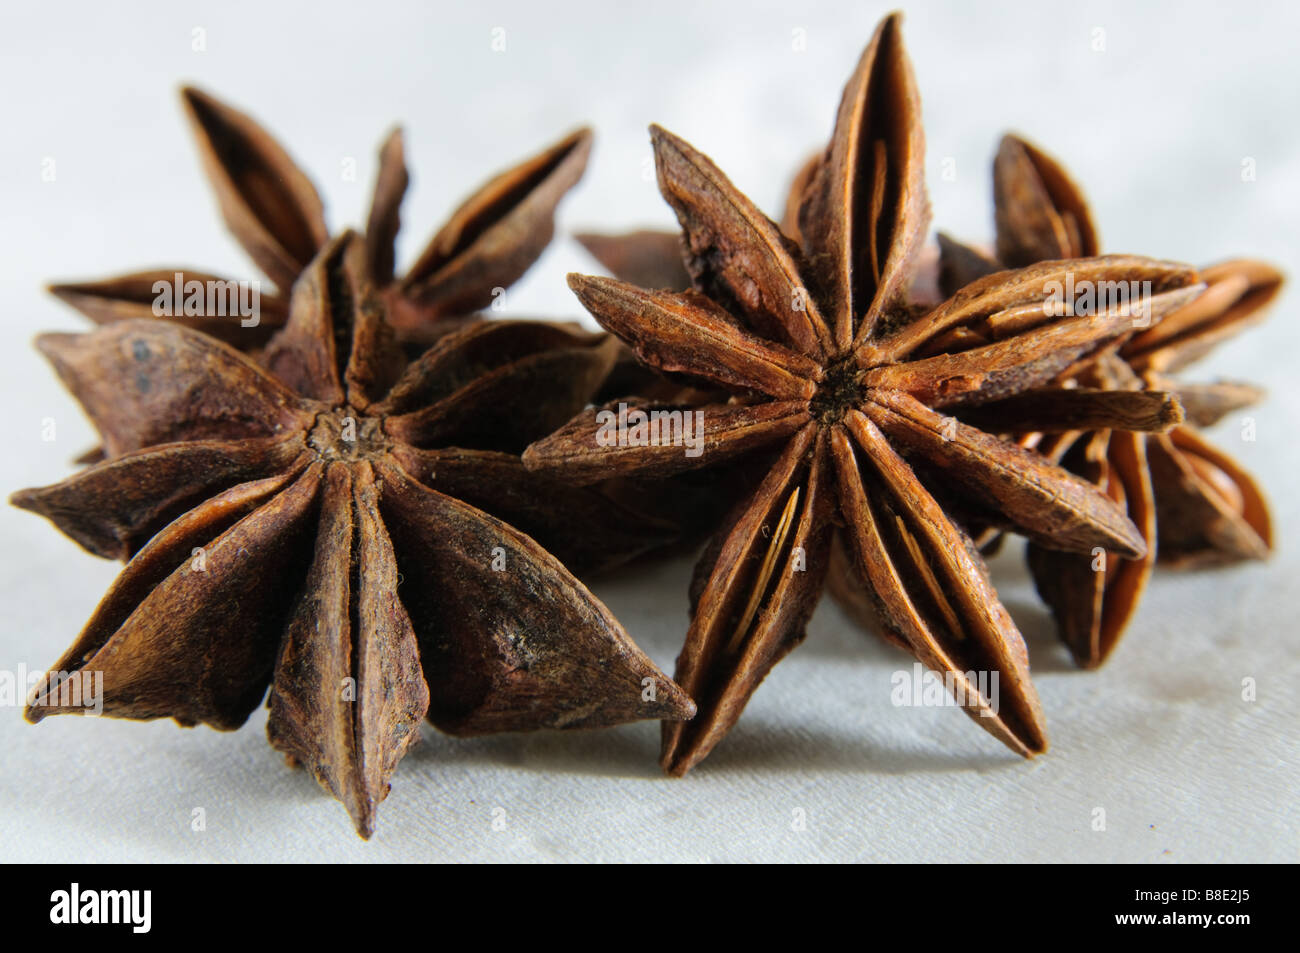 Close-up of the spice 'Star anise' Stock Photo